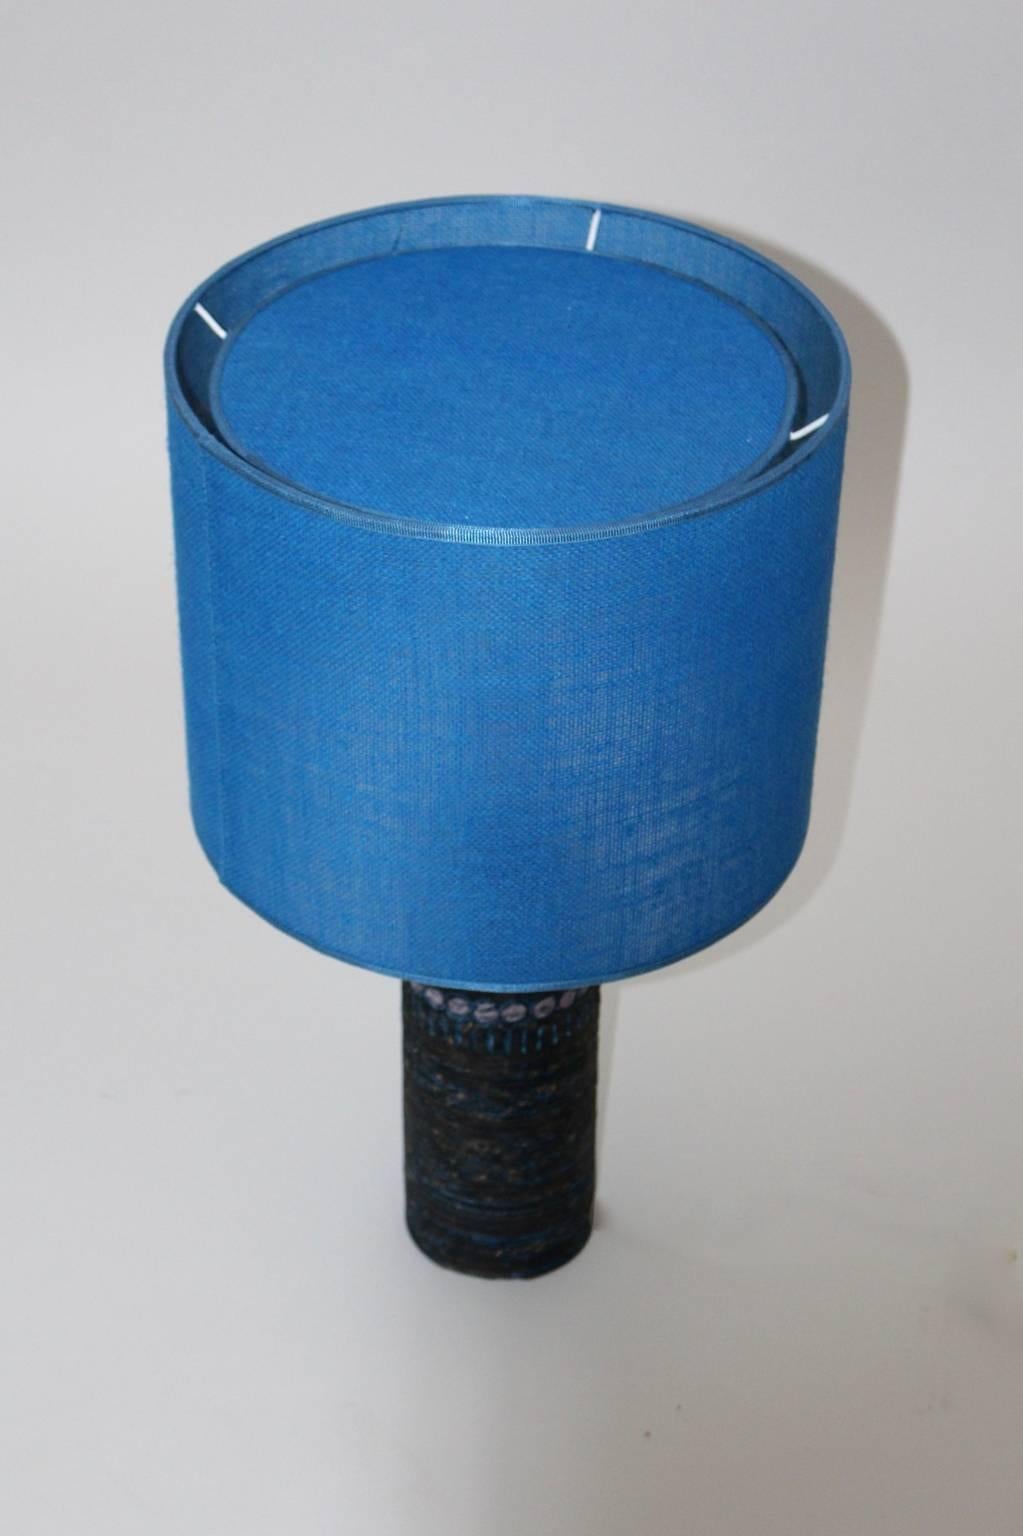 Finnish Blue Mid Century Modern Ceramic Table Lamp by Norrmans-Motola Finland circa 1960 For Sale